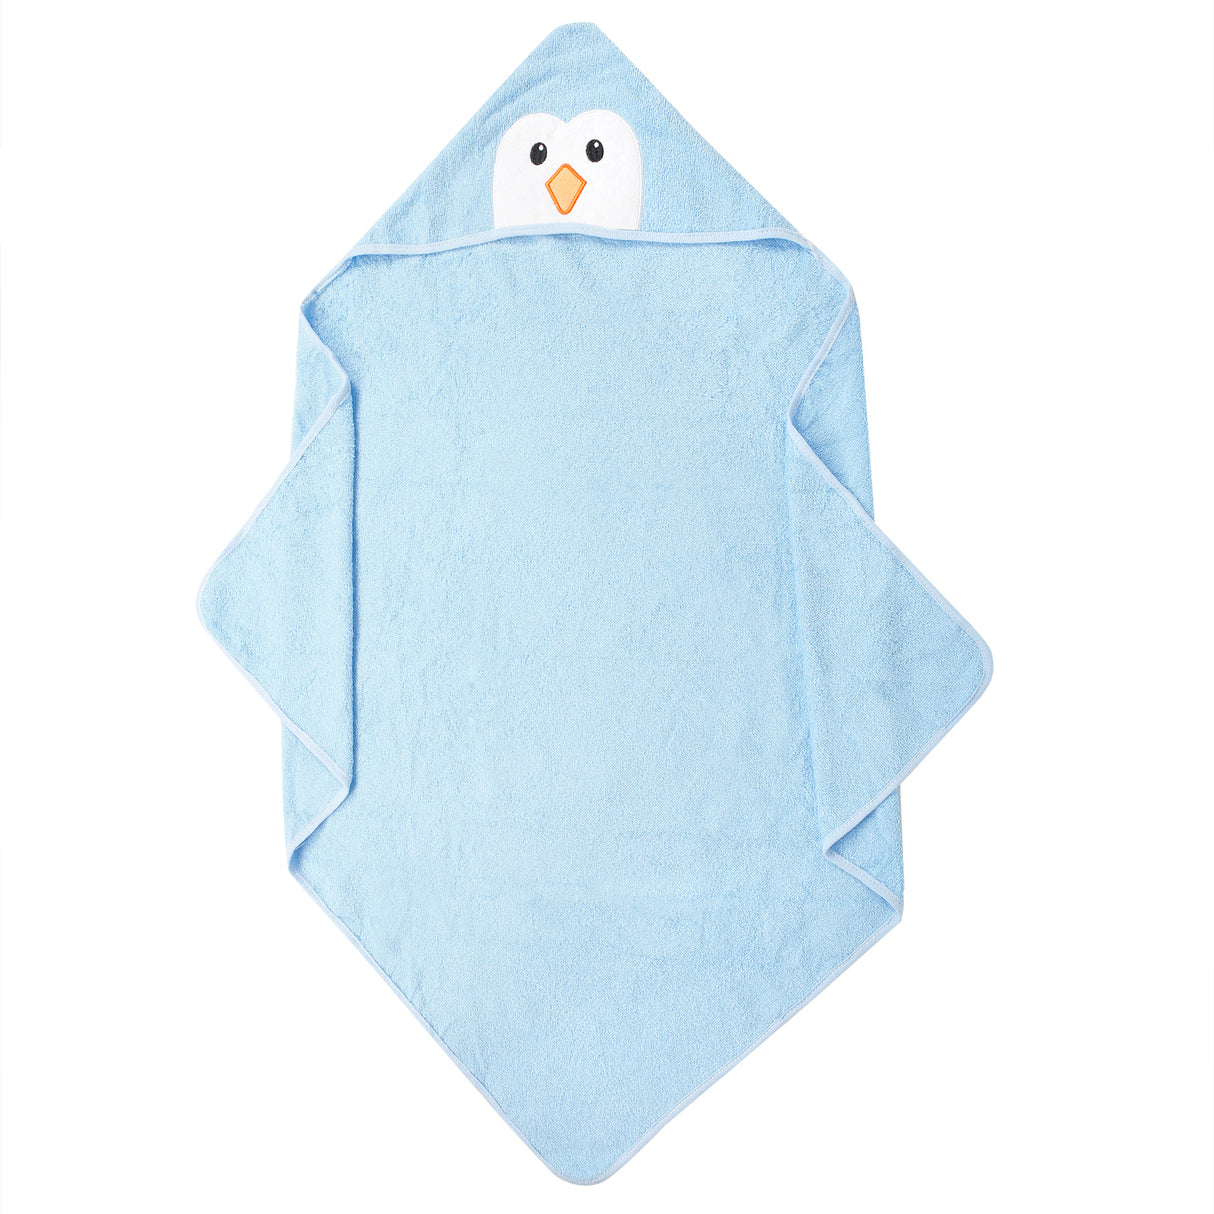 Soft And Gentle Animal Hooded Towel